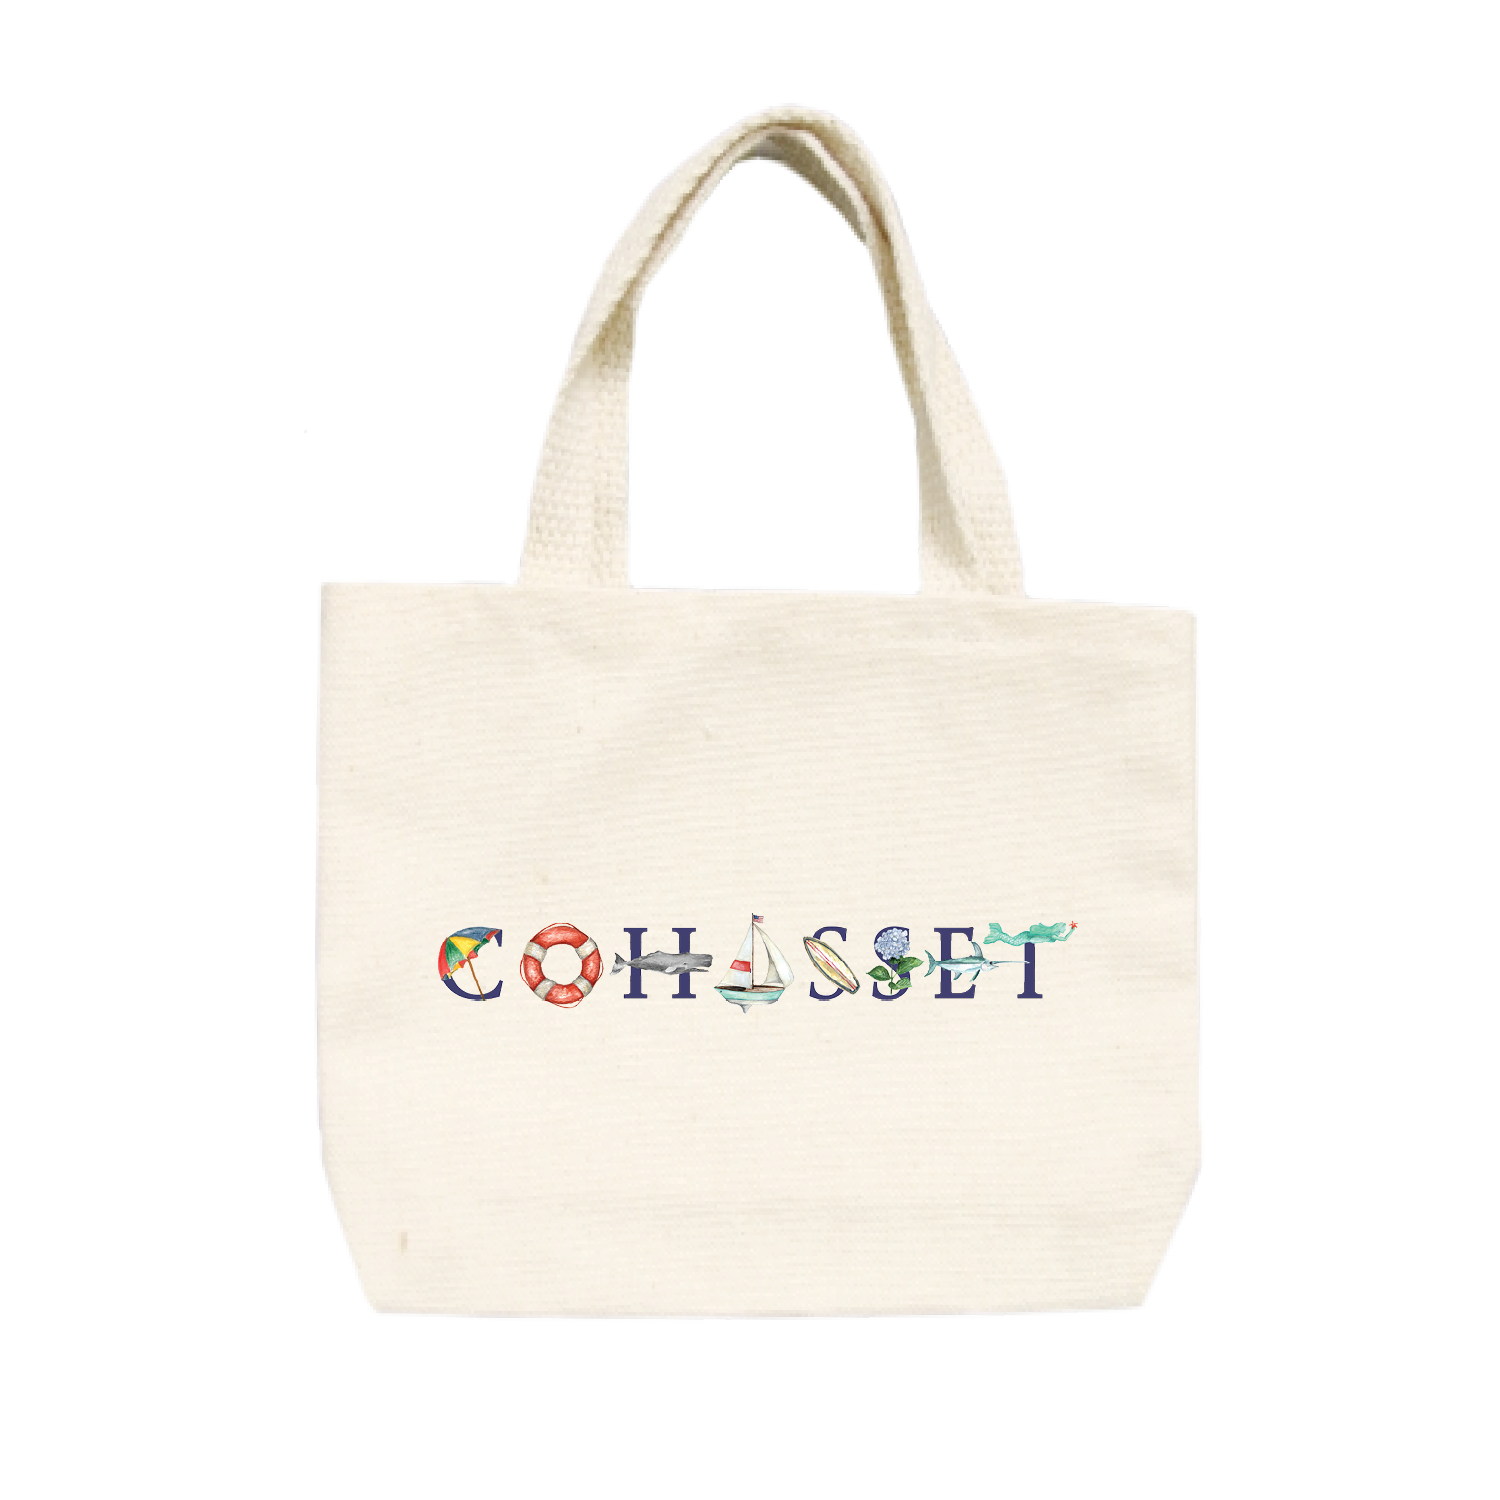 Cohasset small tote